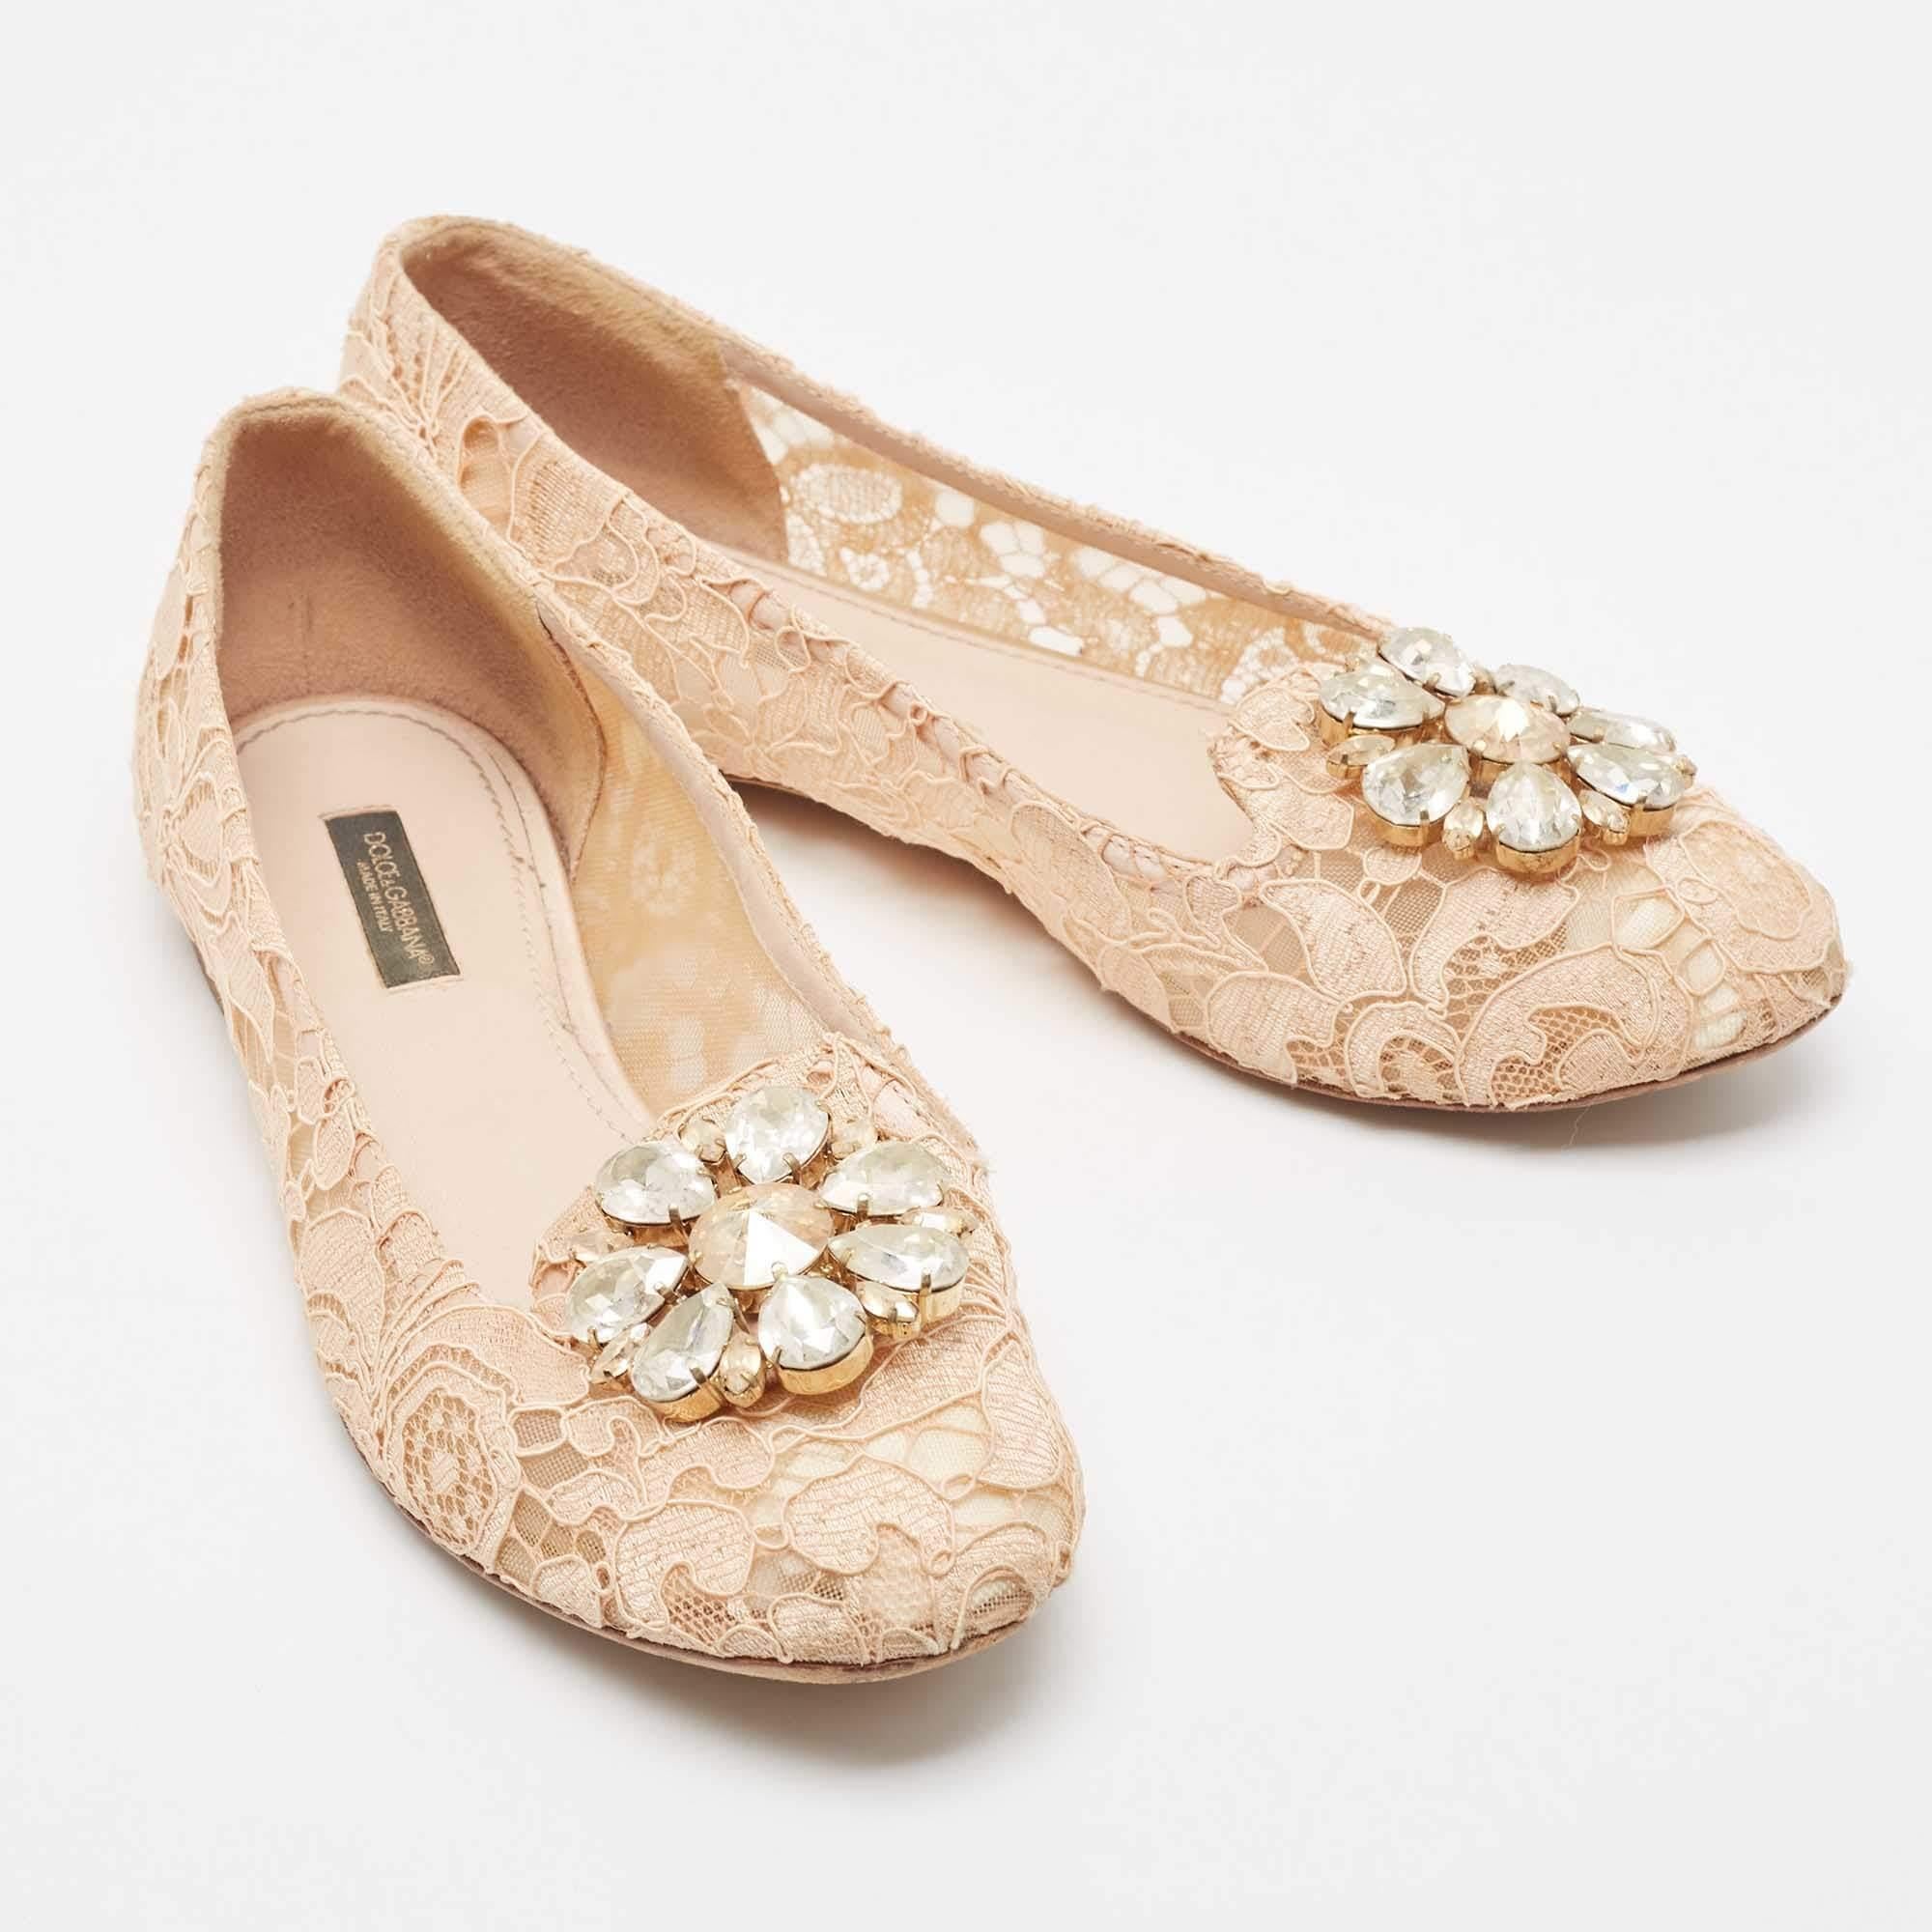 Dolce & Gabbana Blush Pink Lace Crystal Embellished Ballet Flats Size 37.5 In Good Condition For Sale In Dubai, Al Qouz 2